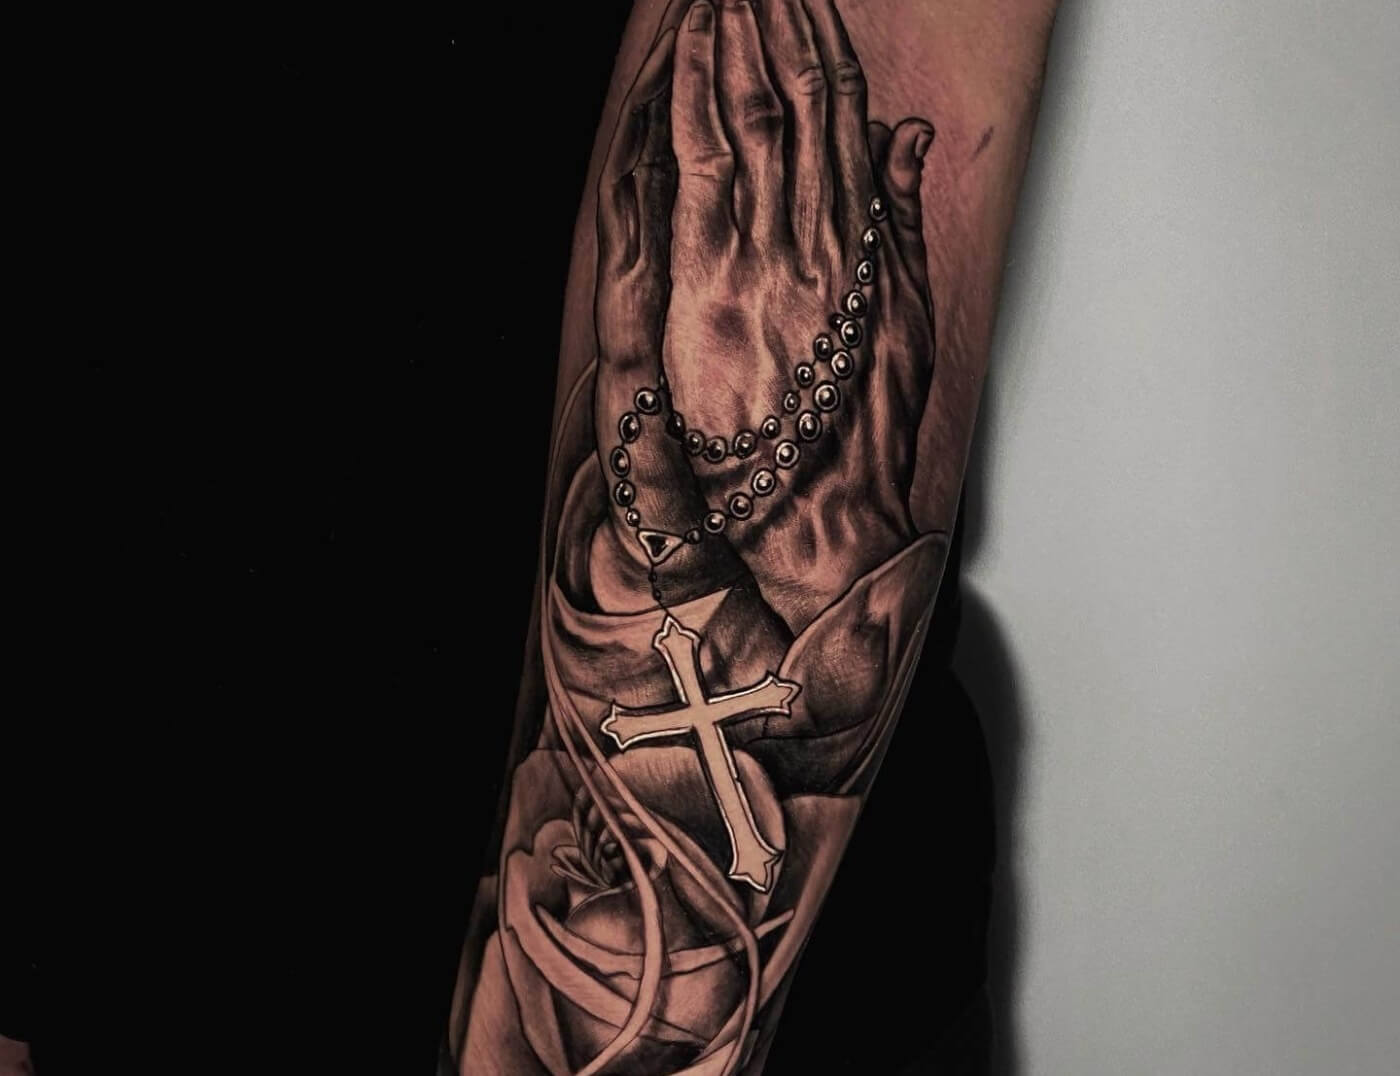 Praying Hands & Rosary Beads Tattoo by Rene Cristobal, a guest artist at Iron Palm Tattoos in Atlanta, GA. Rene comes to Atlanta from Concepcion Chile. Rene is available for booking Sept 11th - 18th, 2023 at Iron Palm. Call 404-973-7828 or stop by for a free consultation. Walk ins are welcome.